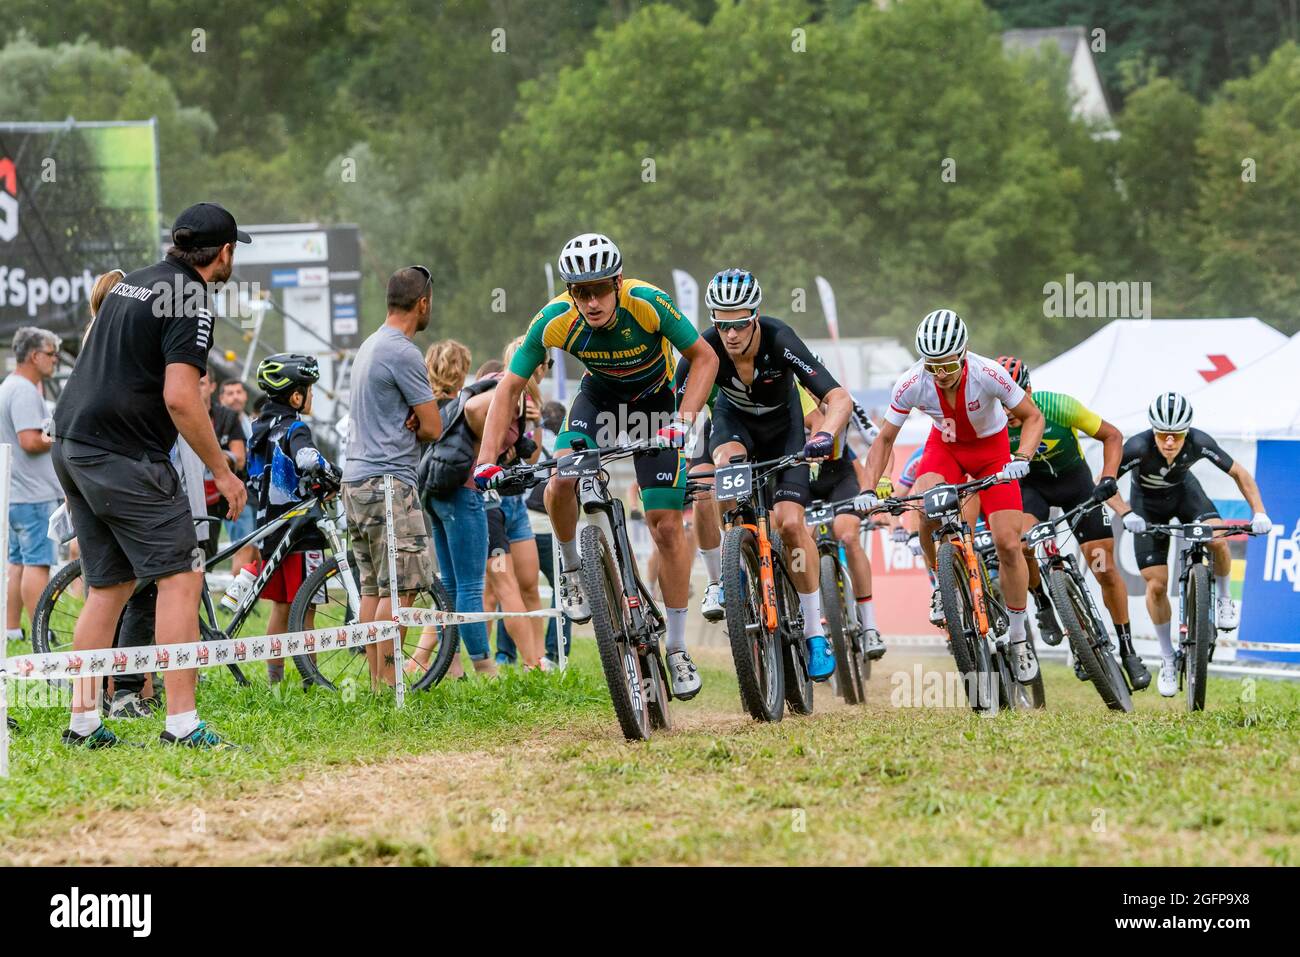 Riders during the Cross Country Short Track XCC at the 2021 MTB World Championships, Mountain Bike cycling event on August 26, 2021 in Val Di Sole, Italy - Photo Olly Bowman / DPPI Stock Photo